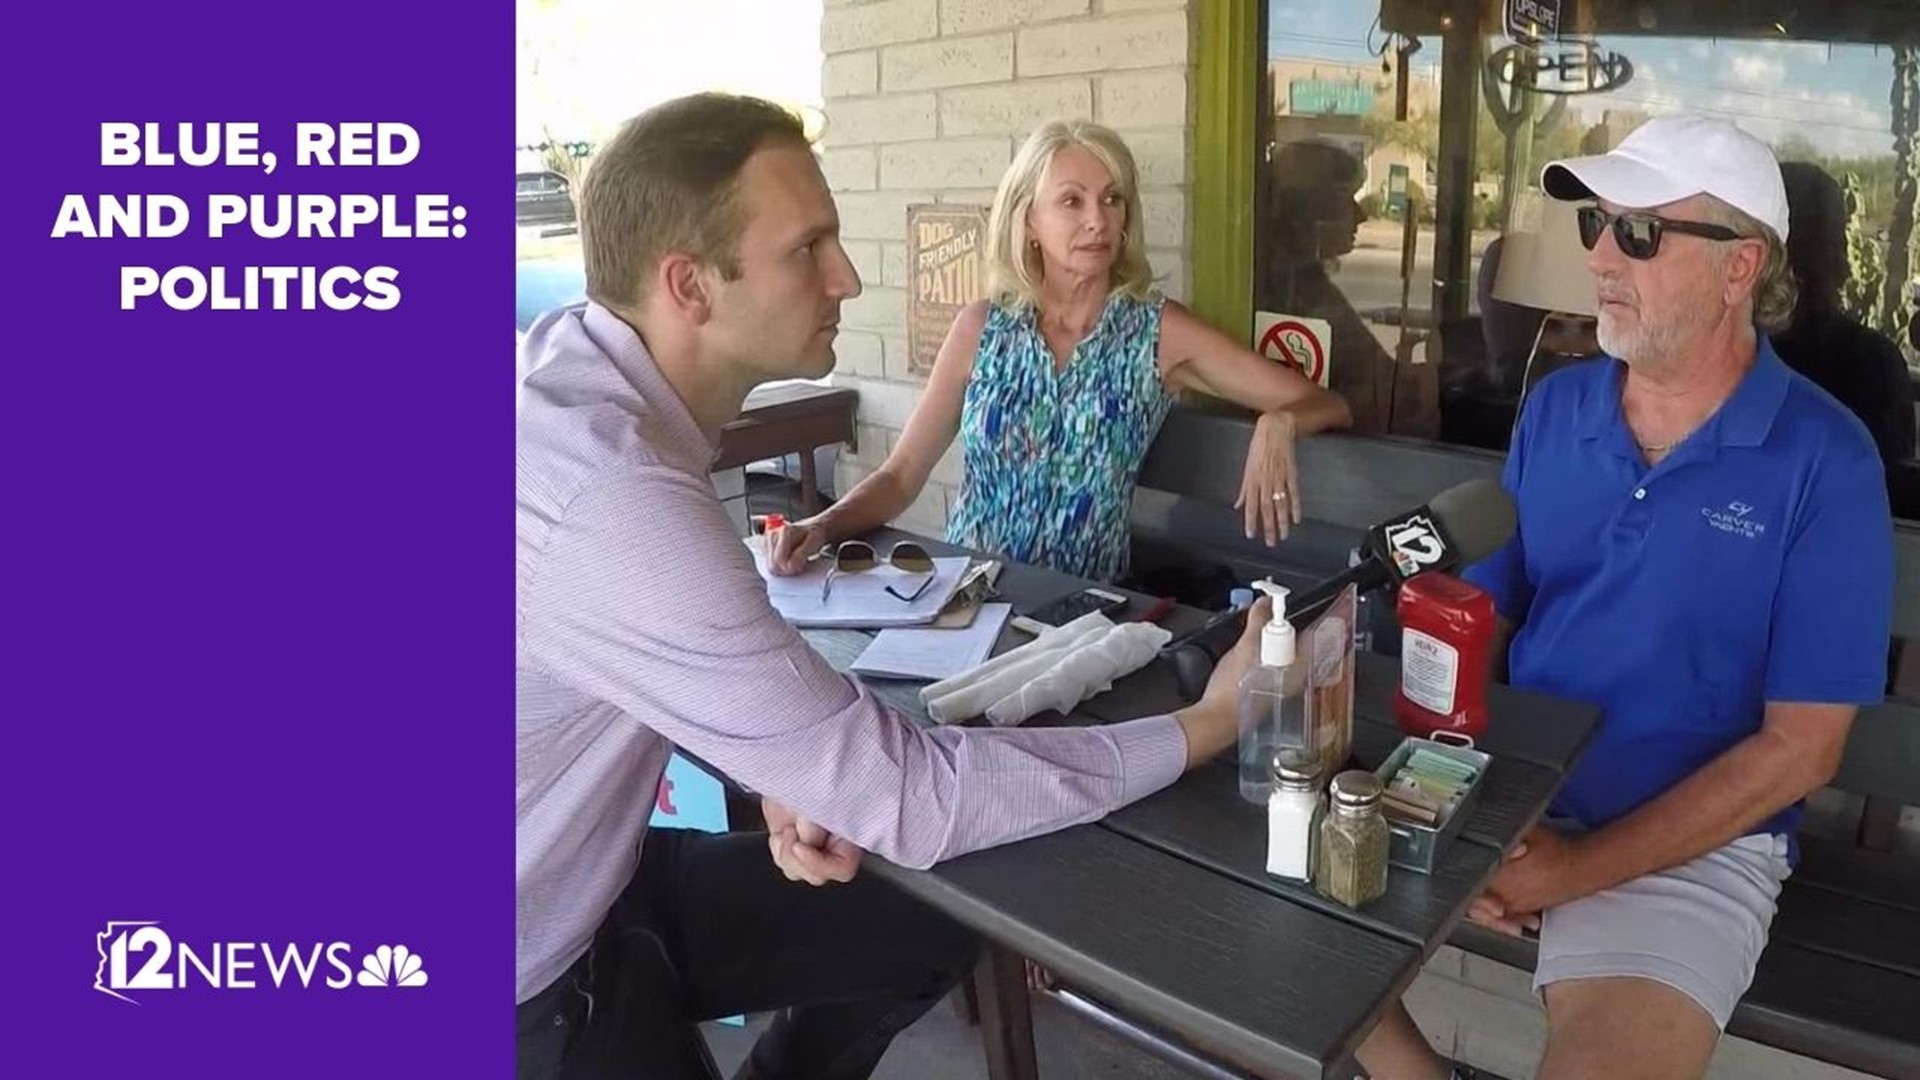 Politicians tell us what they believe Arizonans want, but 12 News went to local diners and bars to ask folks what they think are the most critical issues.